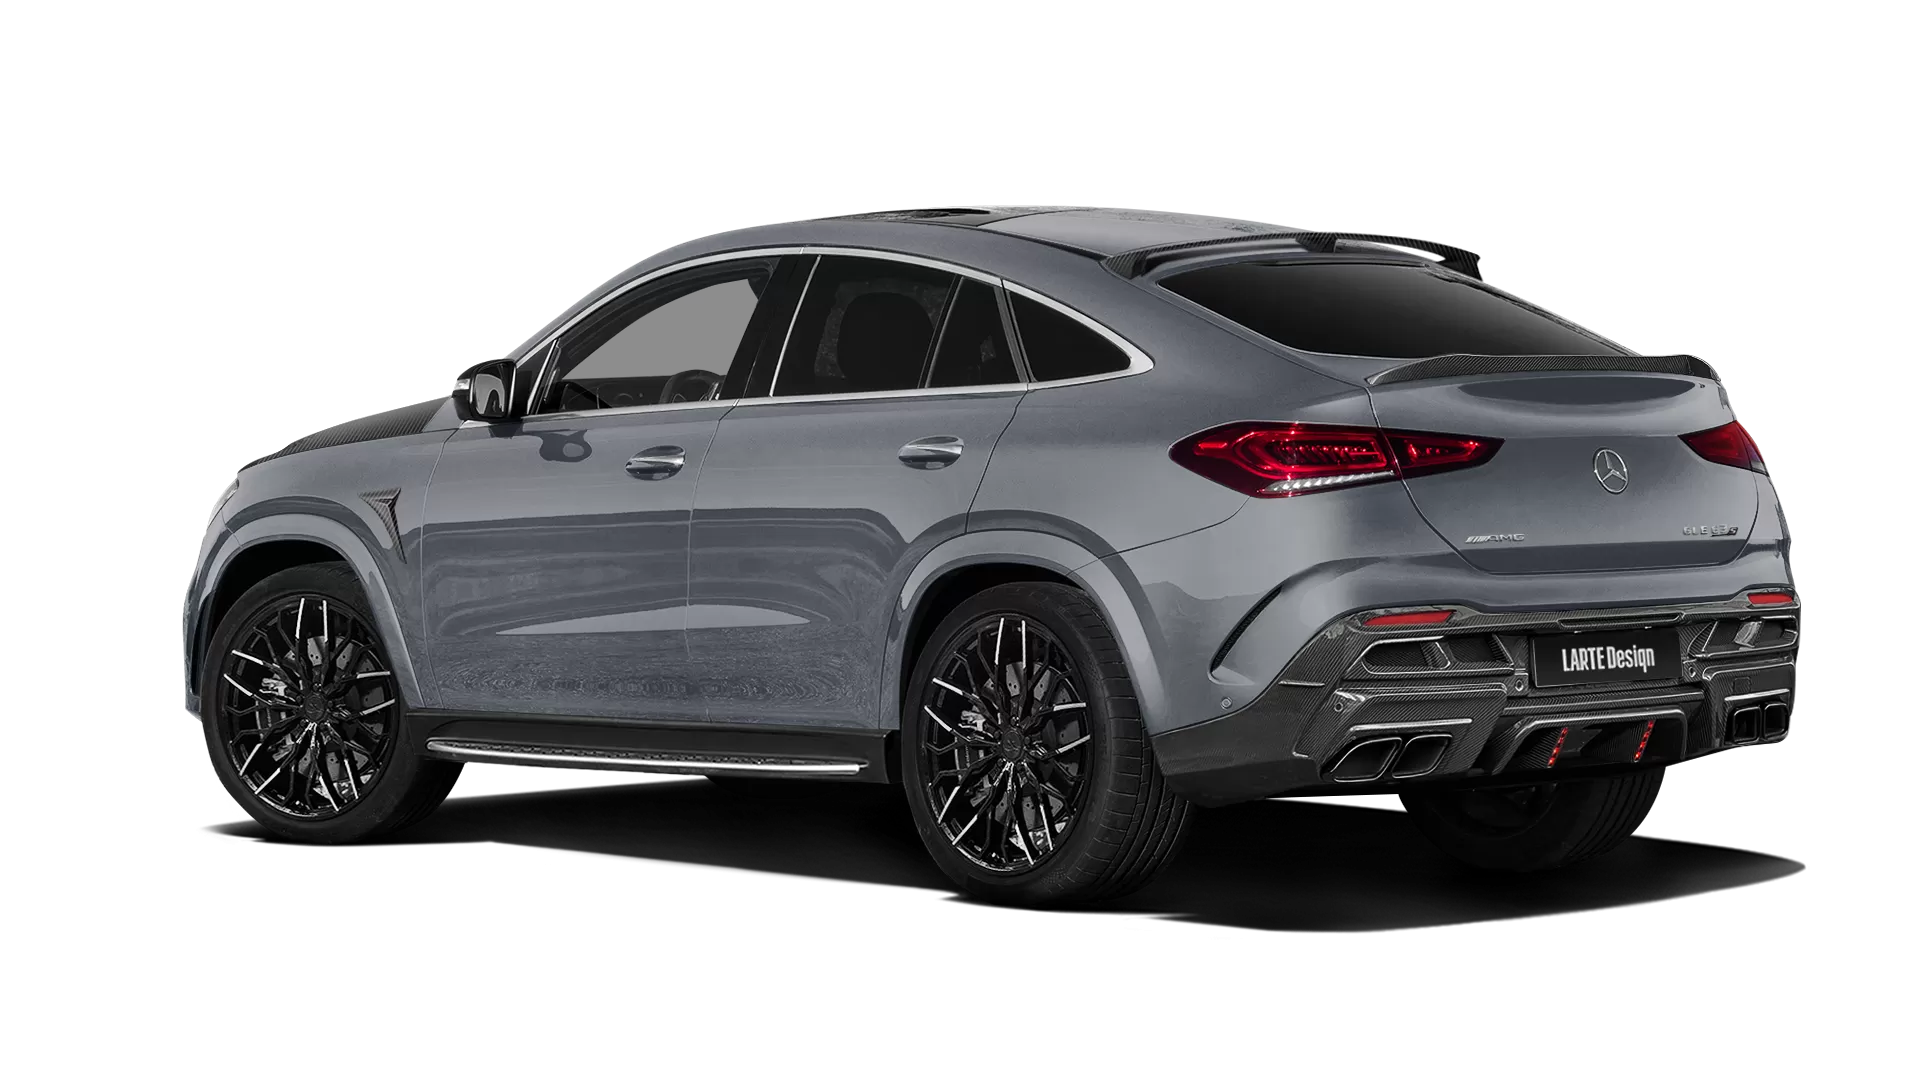 Mercedes GLE Coupe AMG 63 C167 with carbon body kit: back view shown in Selenite Grey